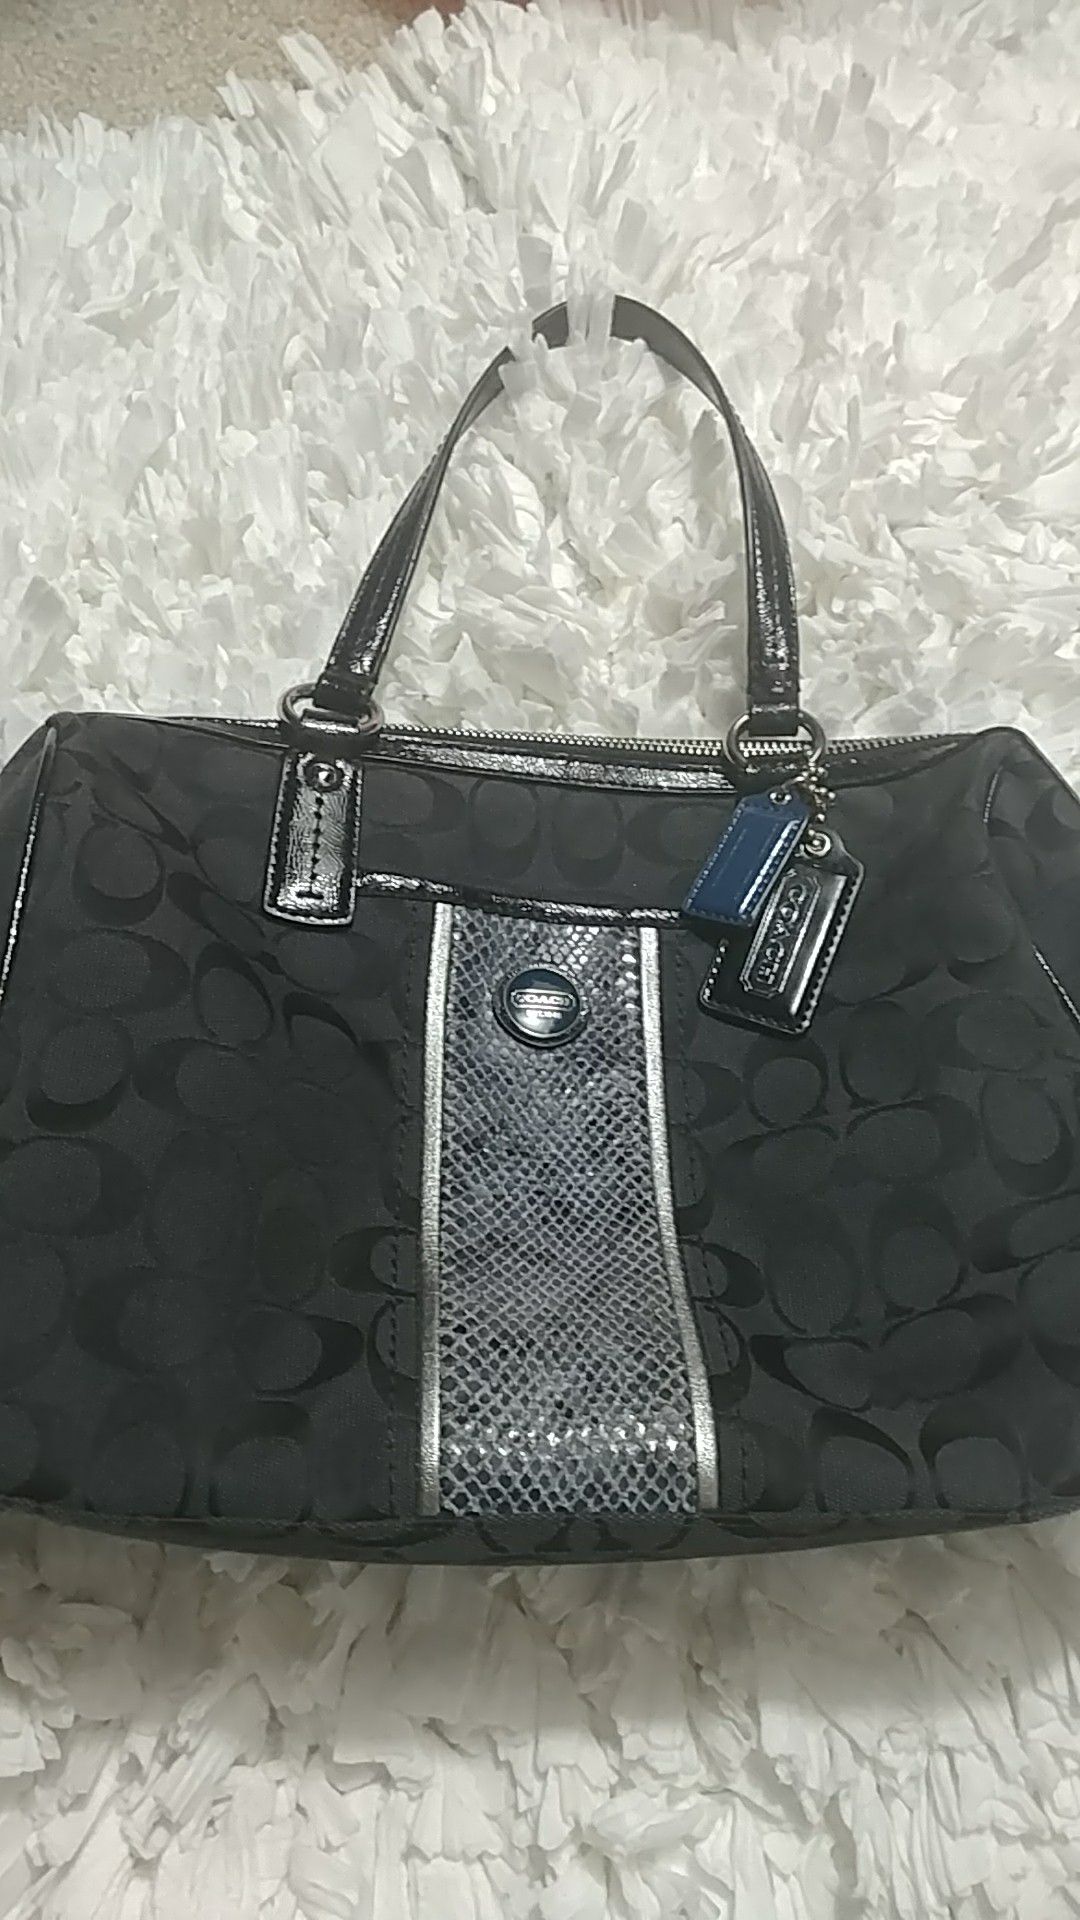 Coach satchel bag f24884 black and gray med size